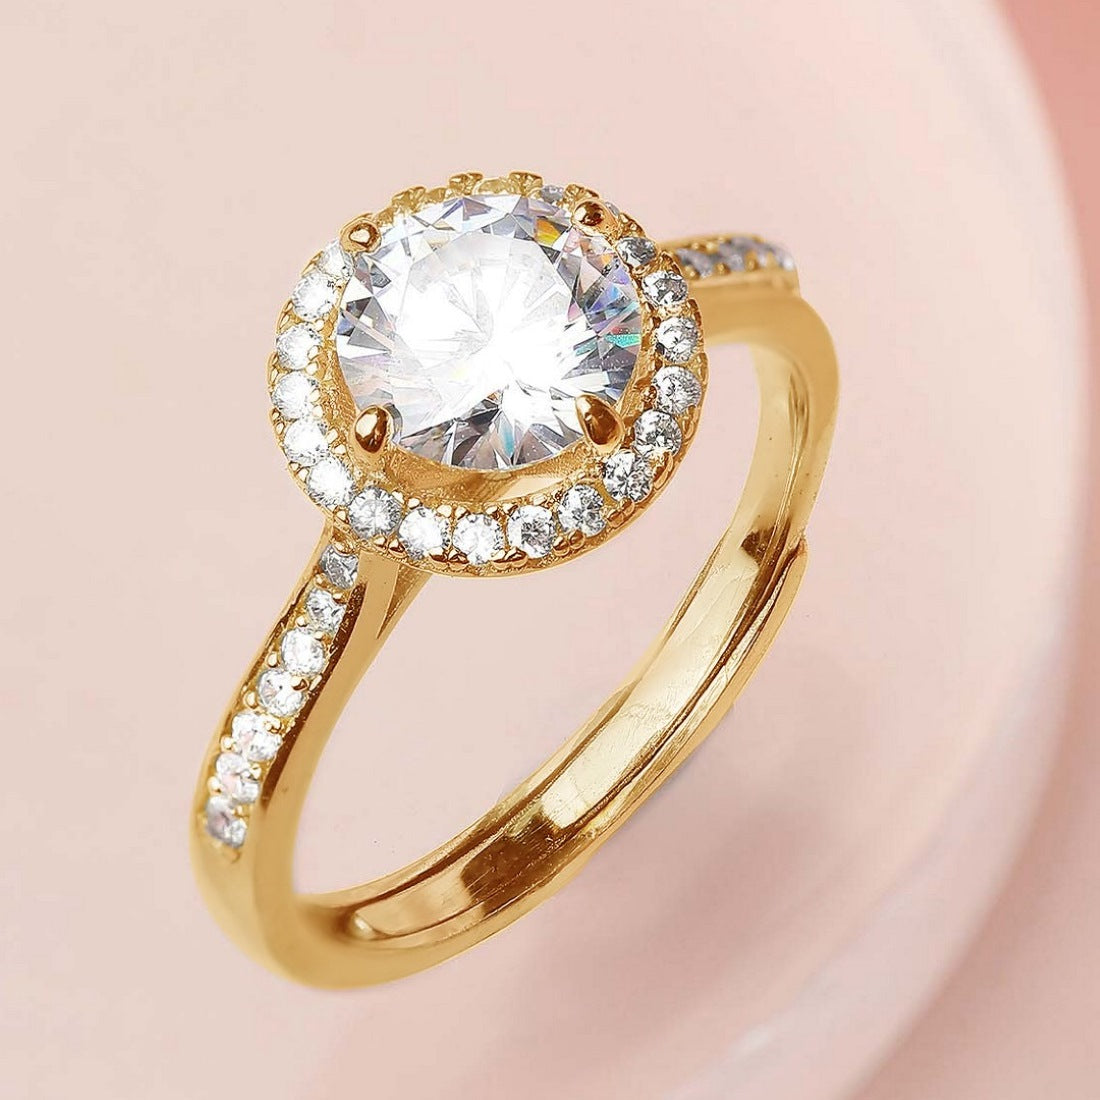 Golden Aura Gold-Plated 925 Sterling Silver Solitaire Halo Ring for Her